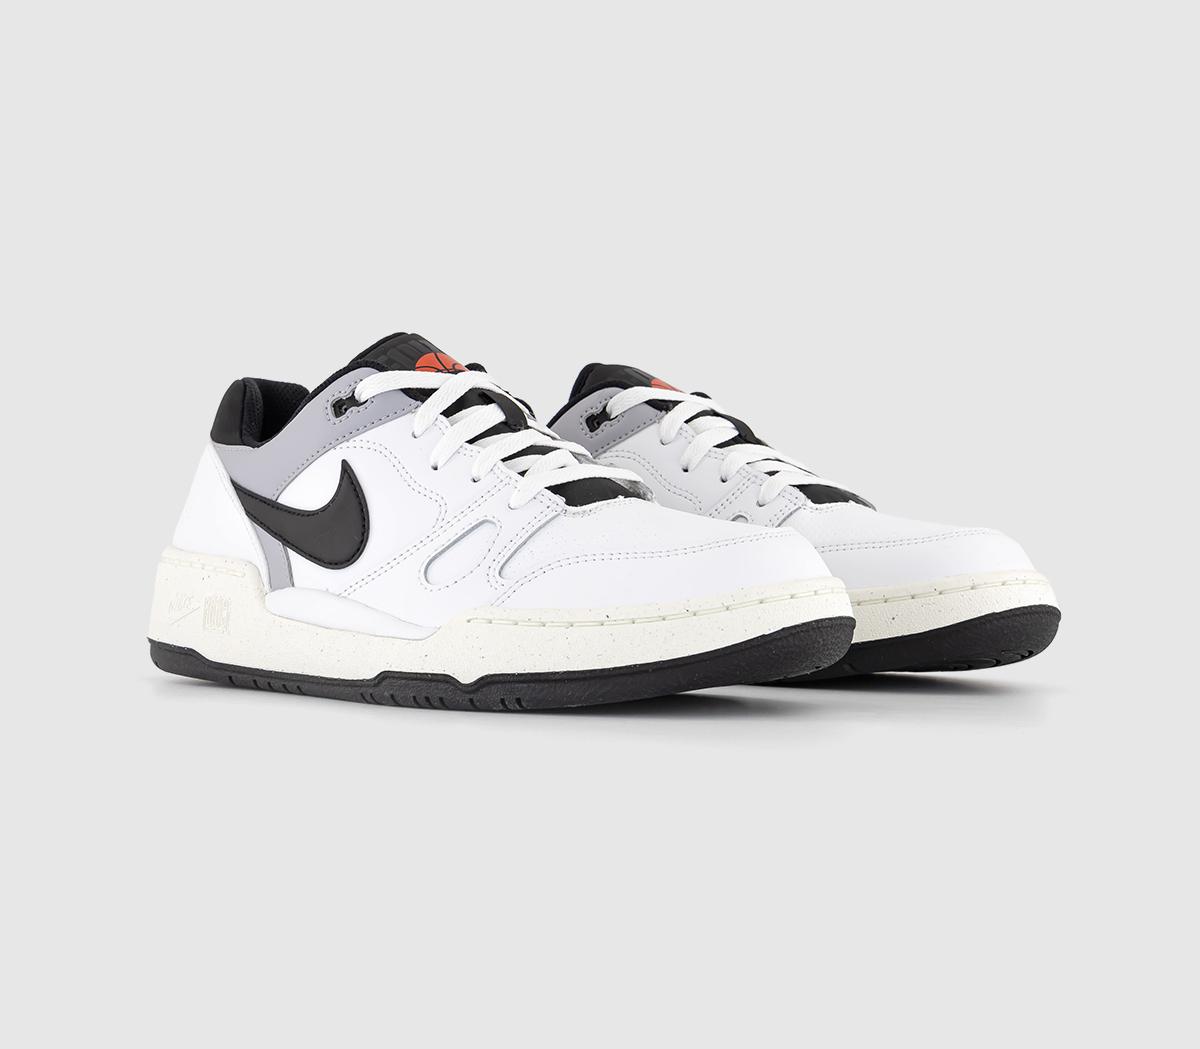 Nike Full Force Trainers White Black Pewter Sail, 9